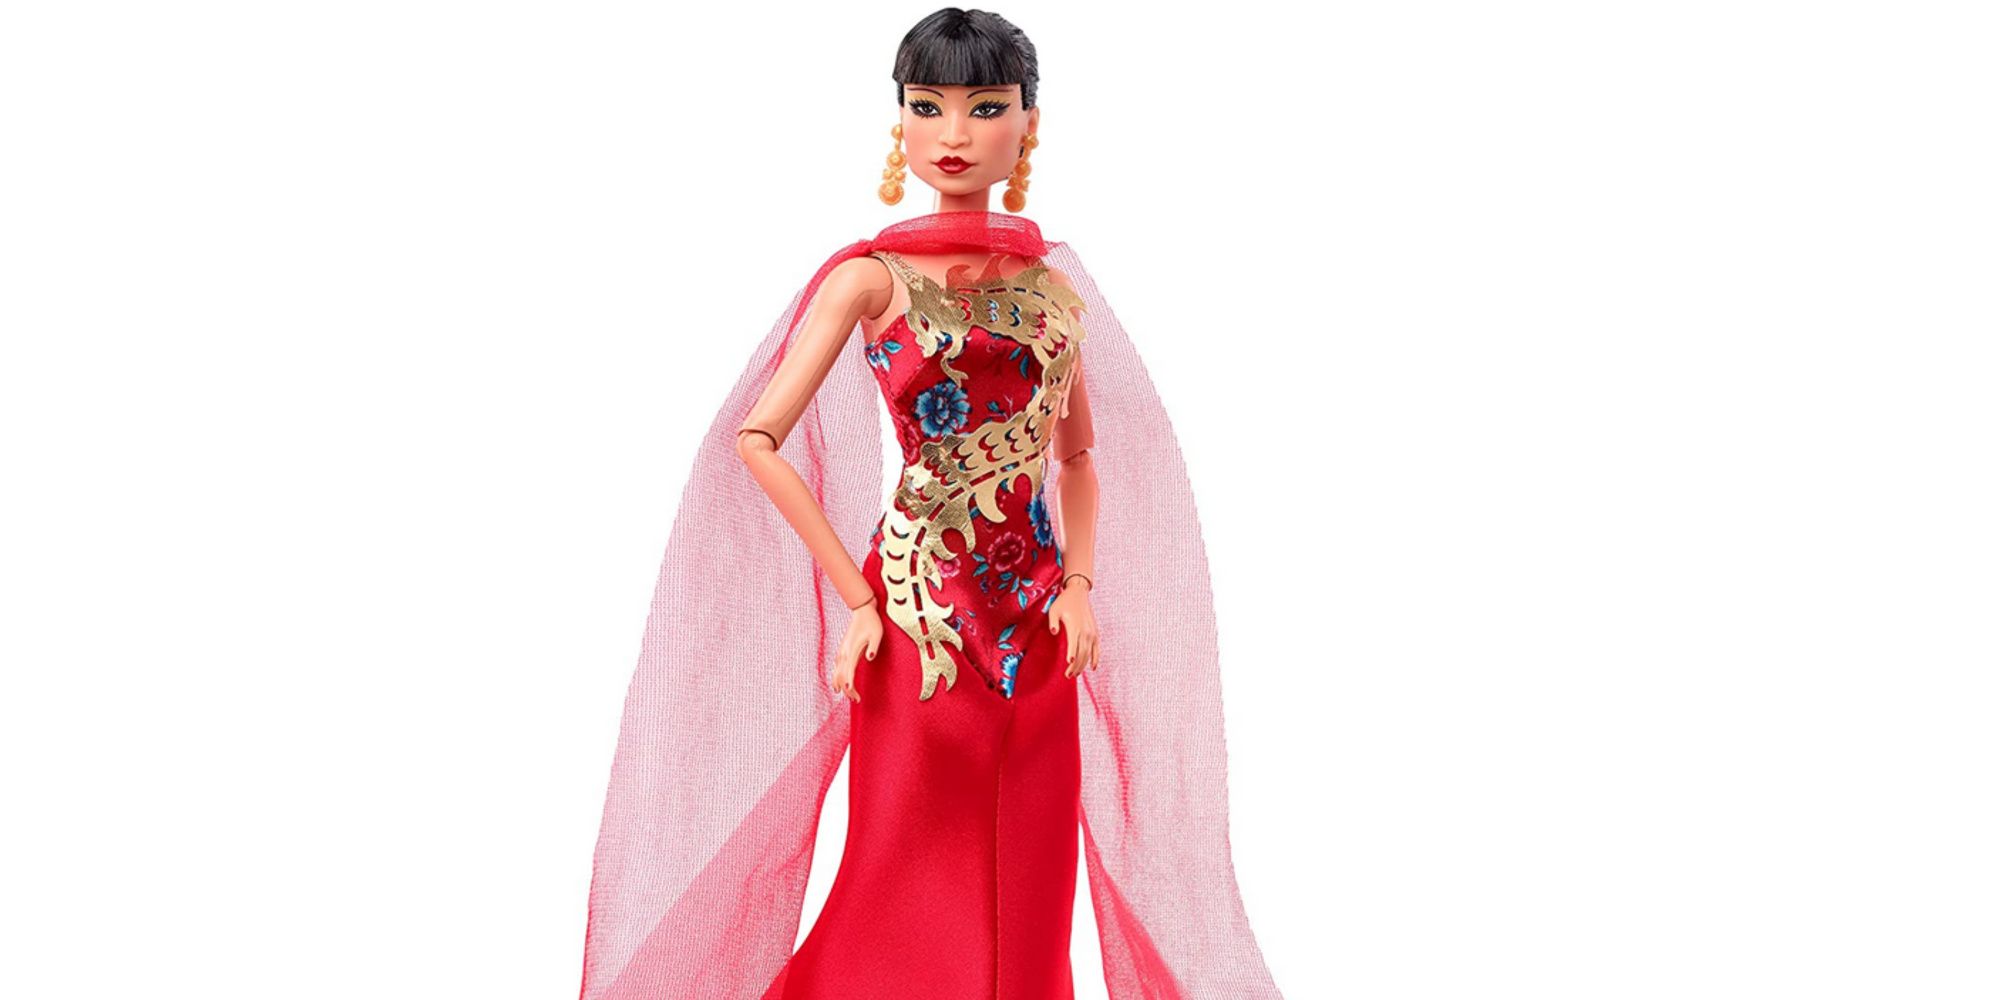 Anna Mae Wong doll from Barbie's Inspiration Woman series